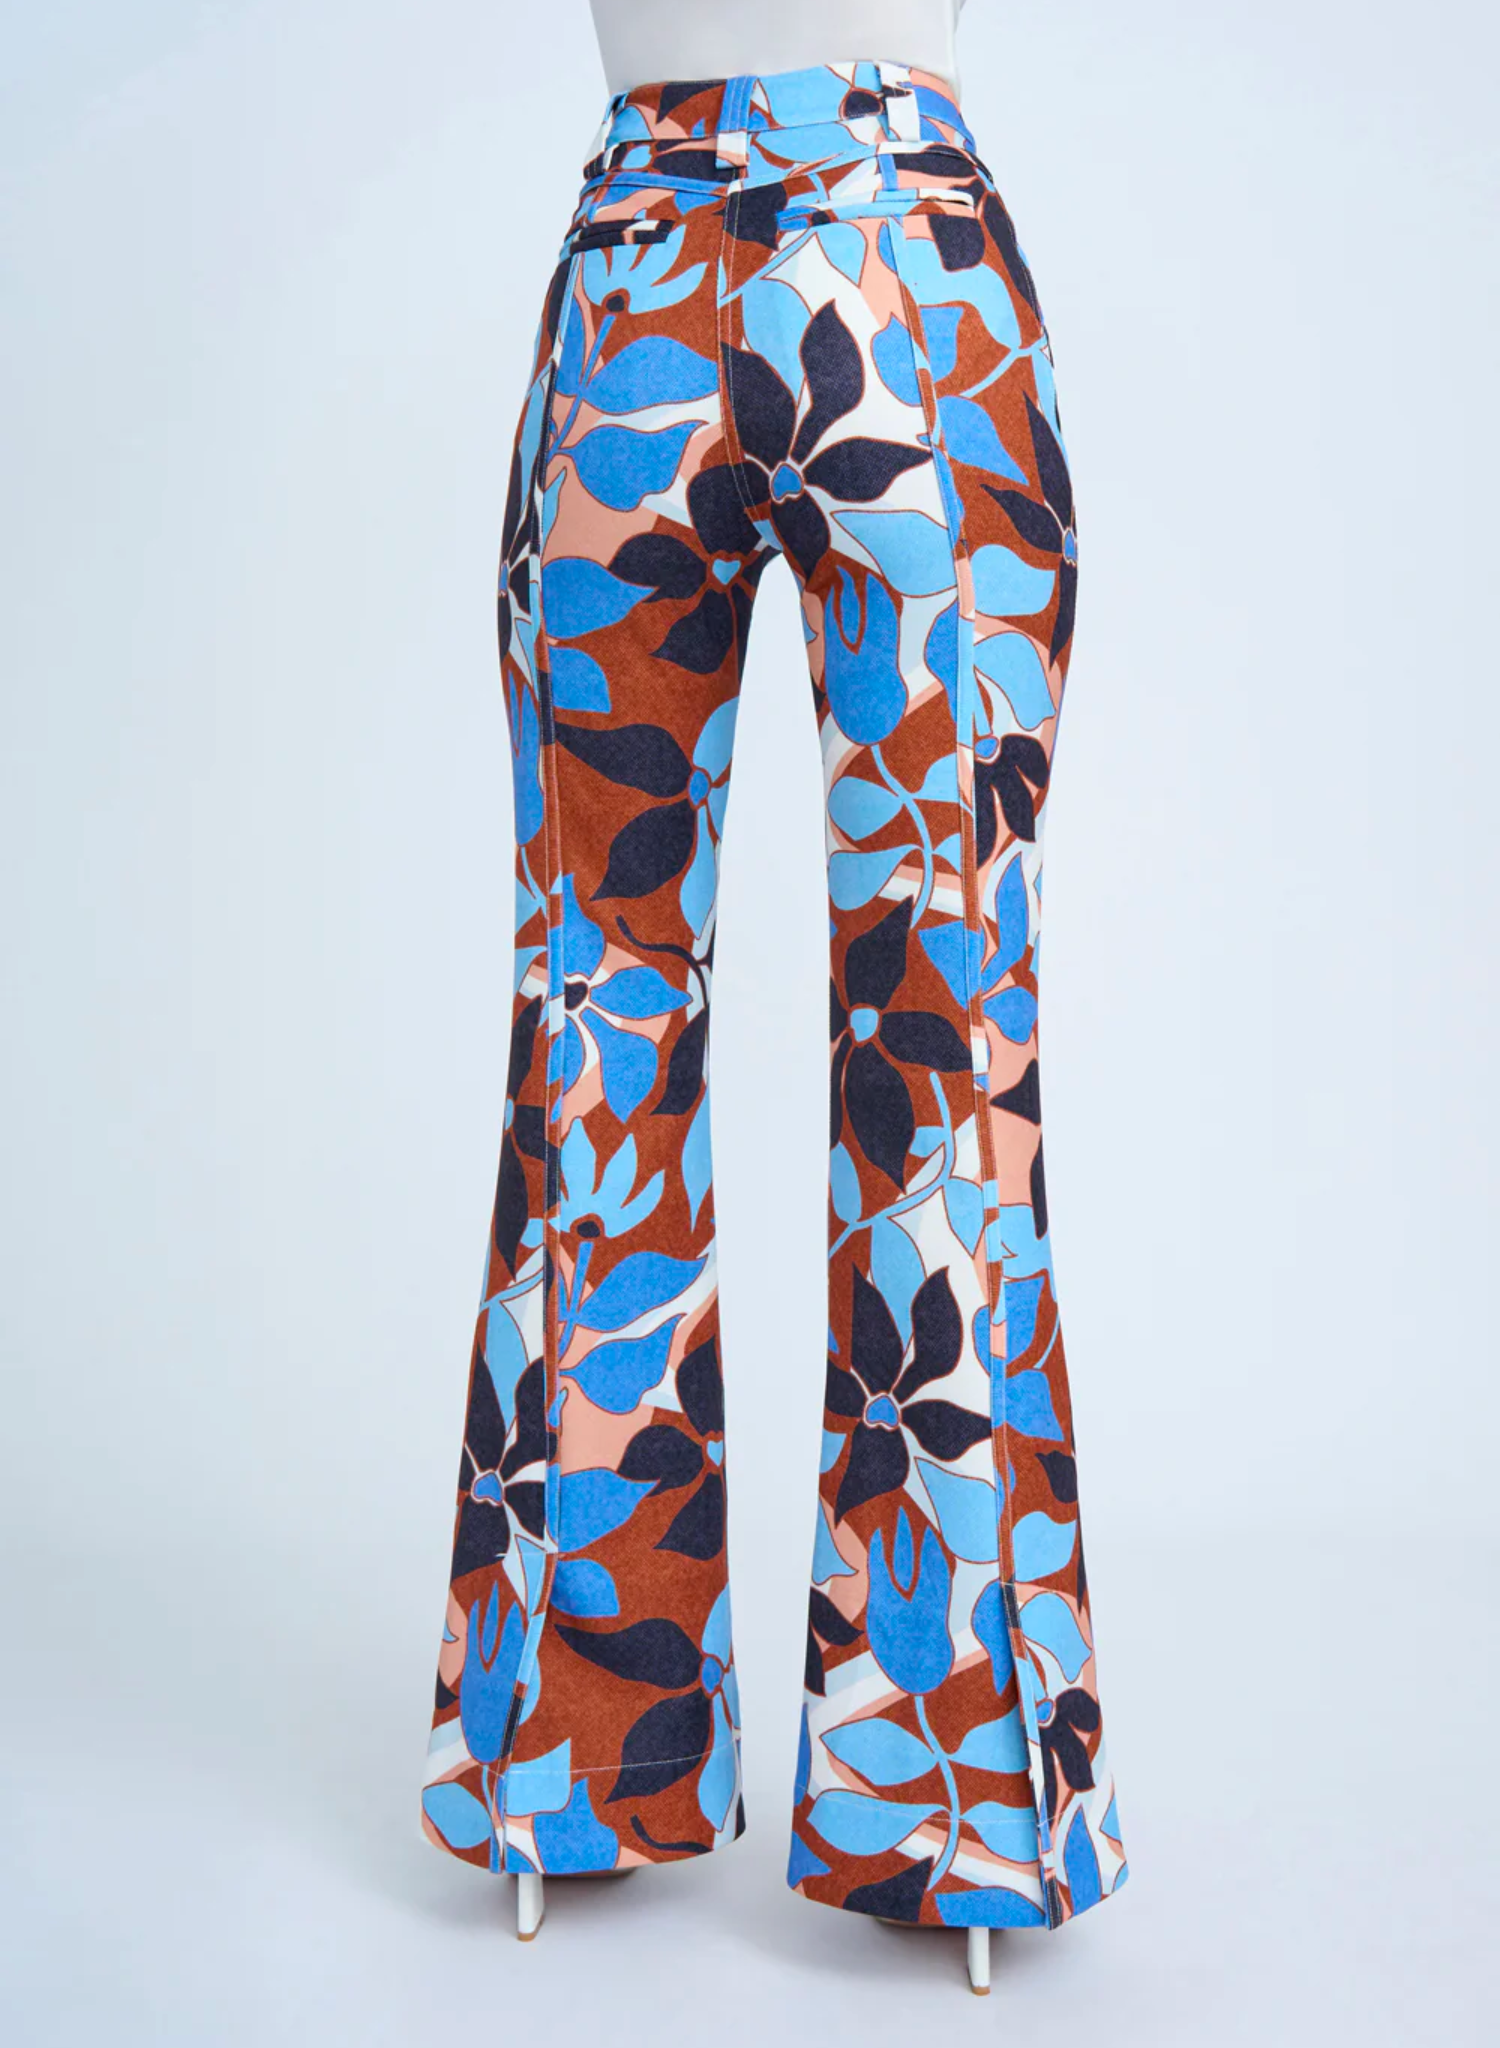 OPHELIA FLORAL FLARE PANT IN NAVY TAN BROWN IVORY